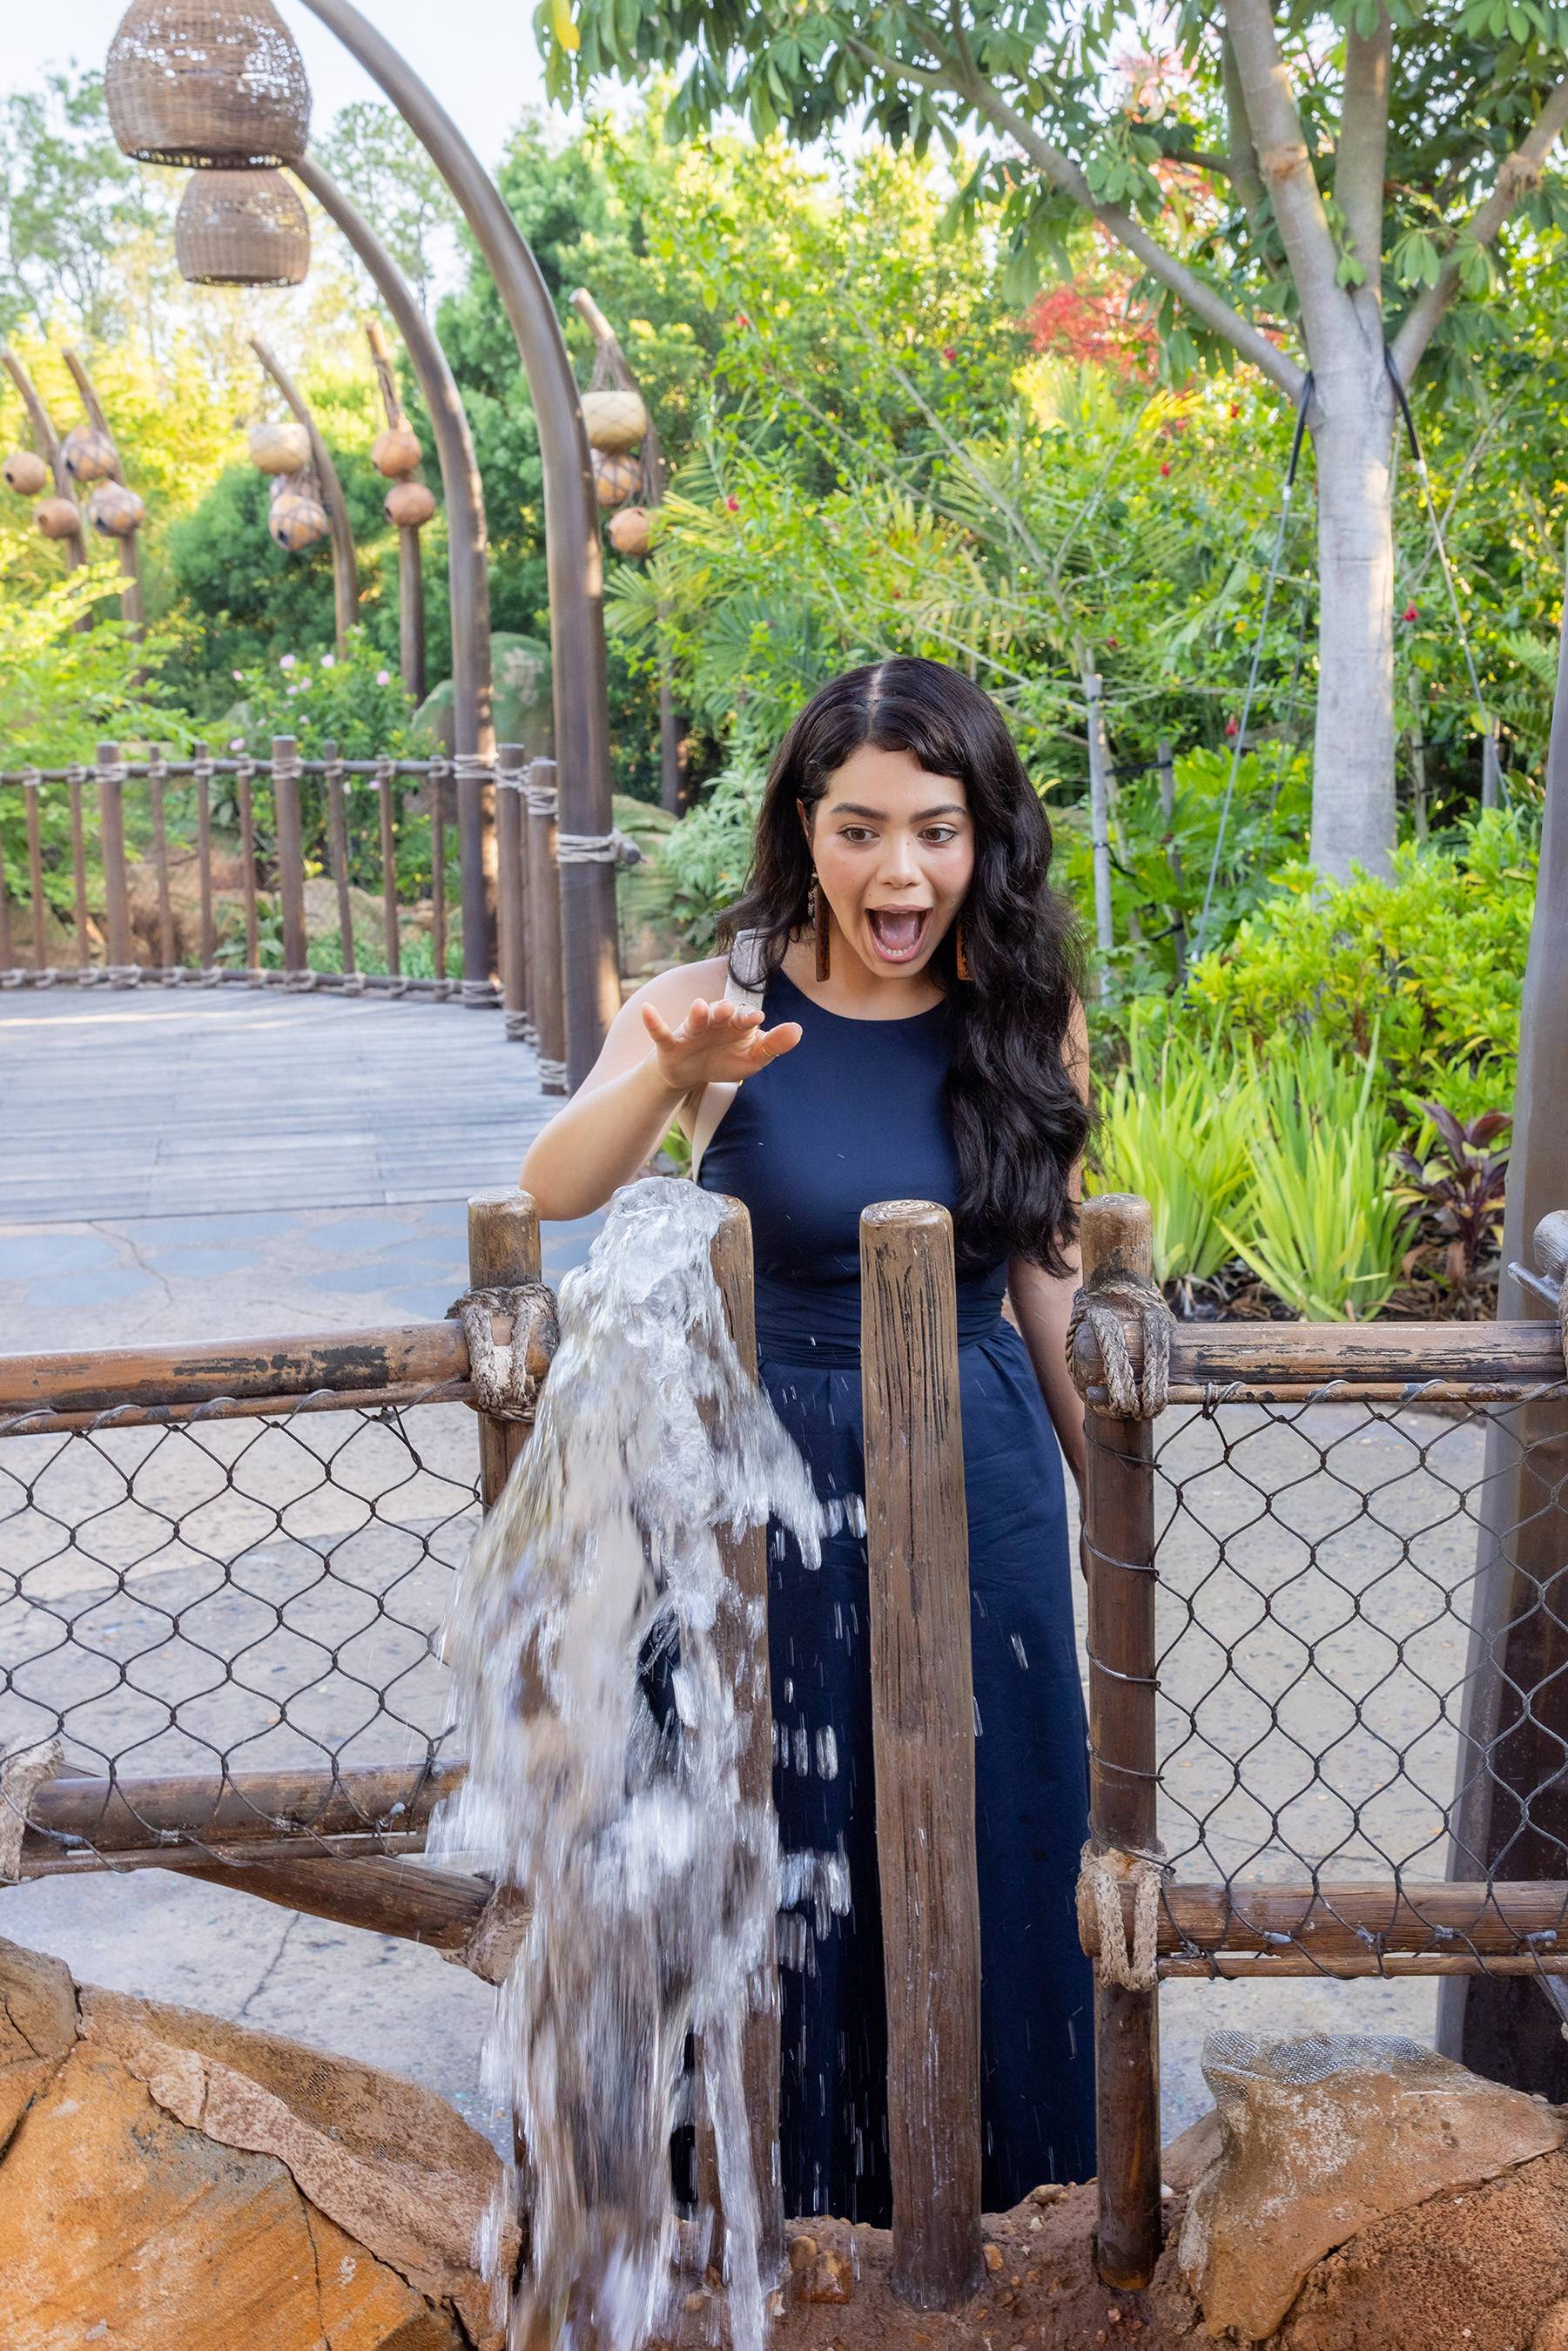  Auli'i Cravalho Experiences Journey of Water, Inspired by Moana at EPCOT